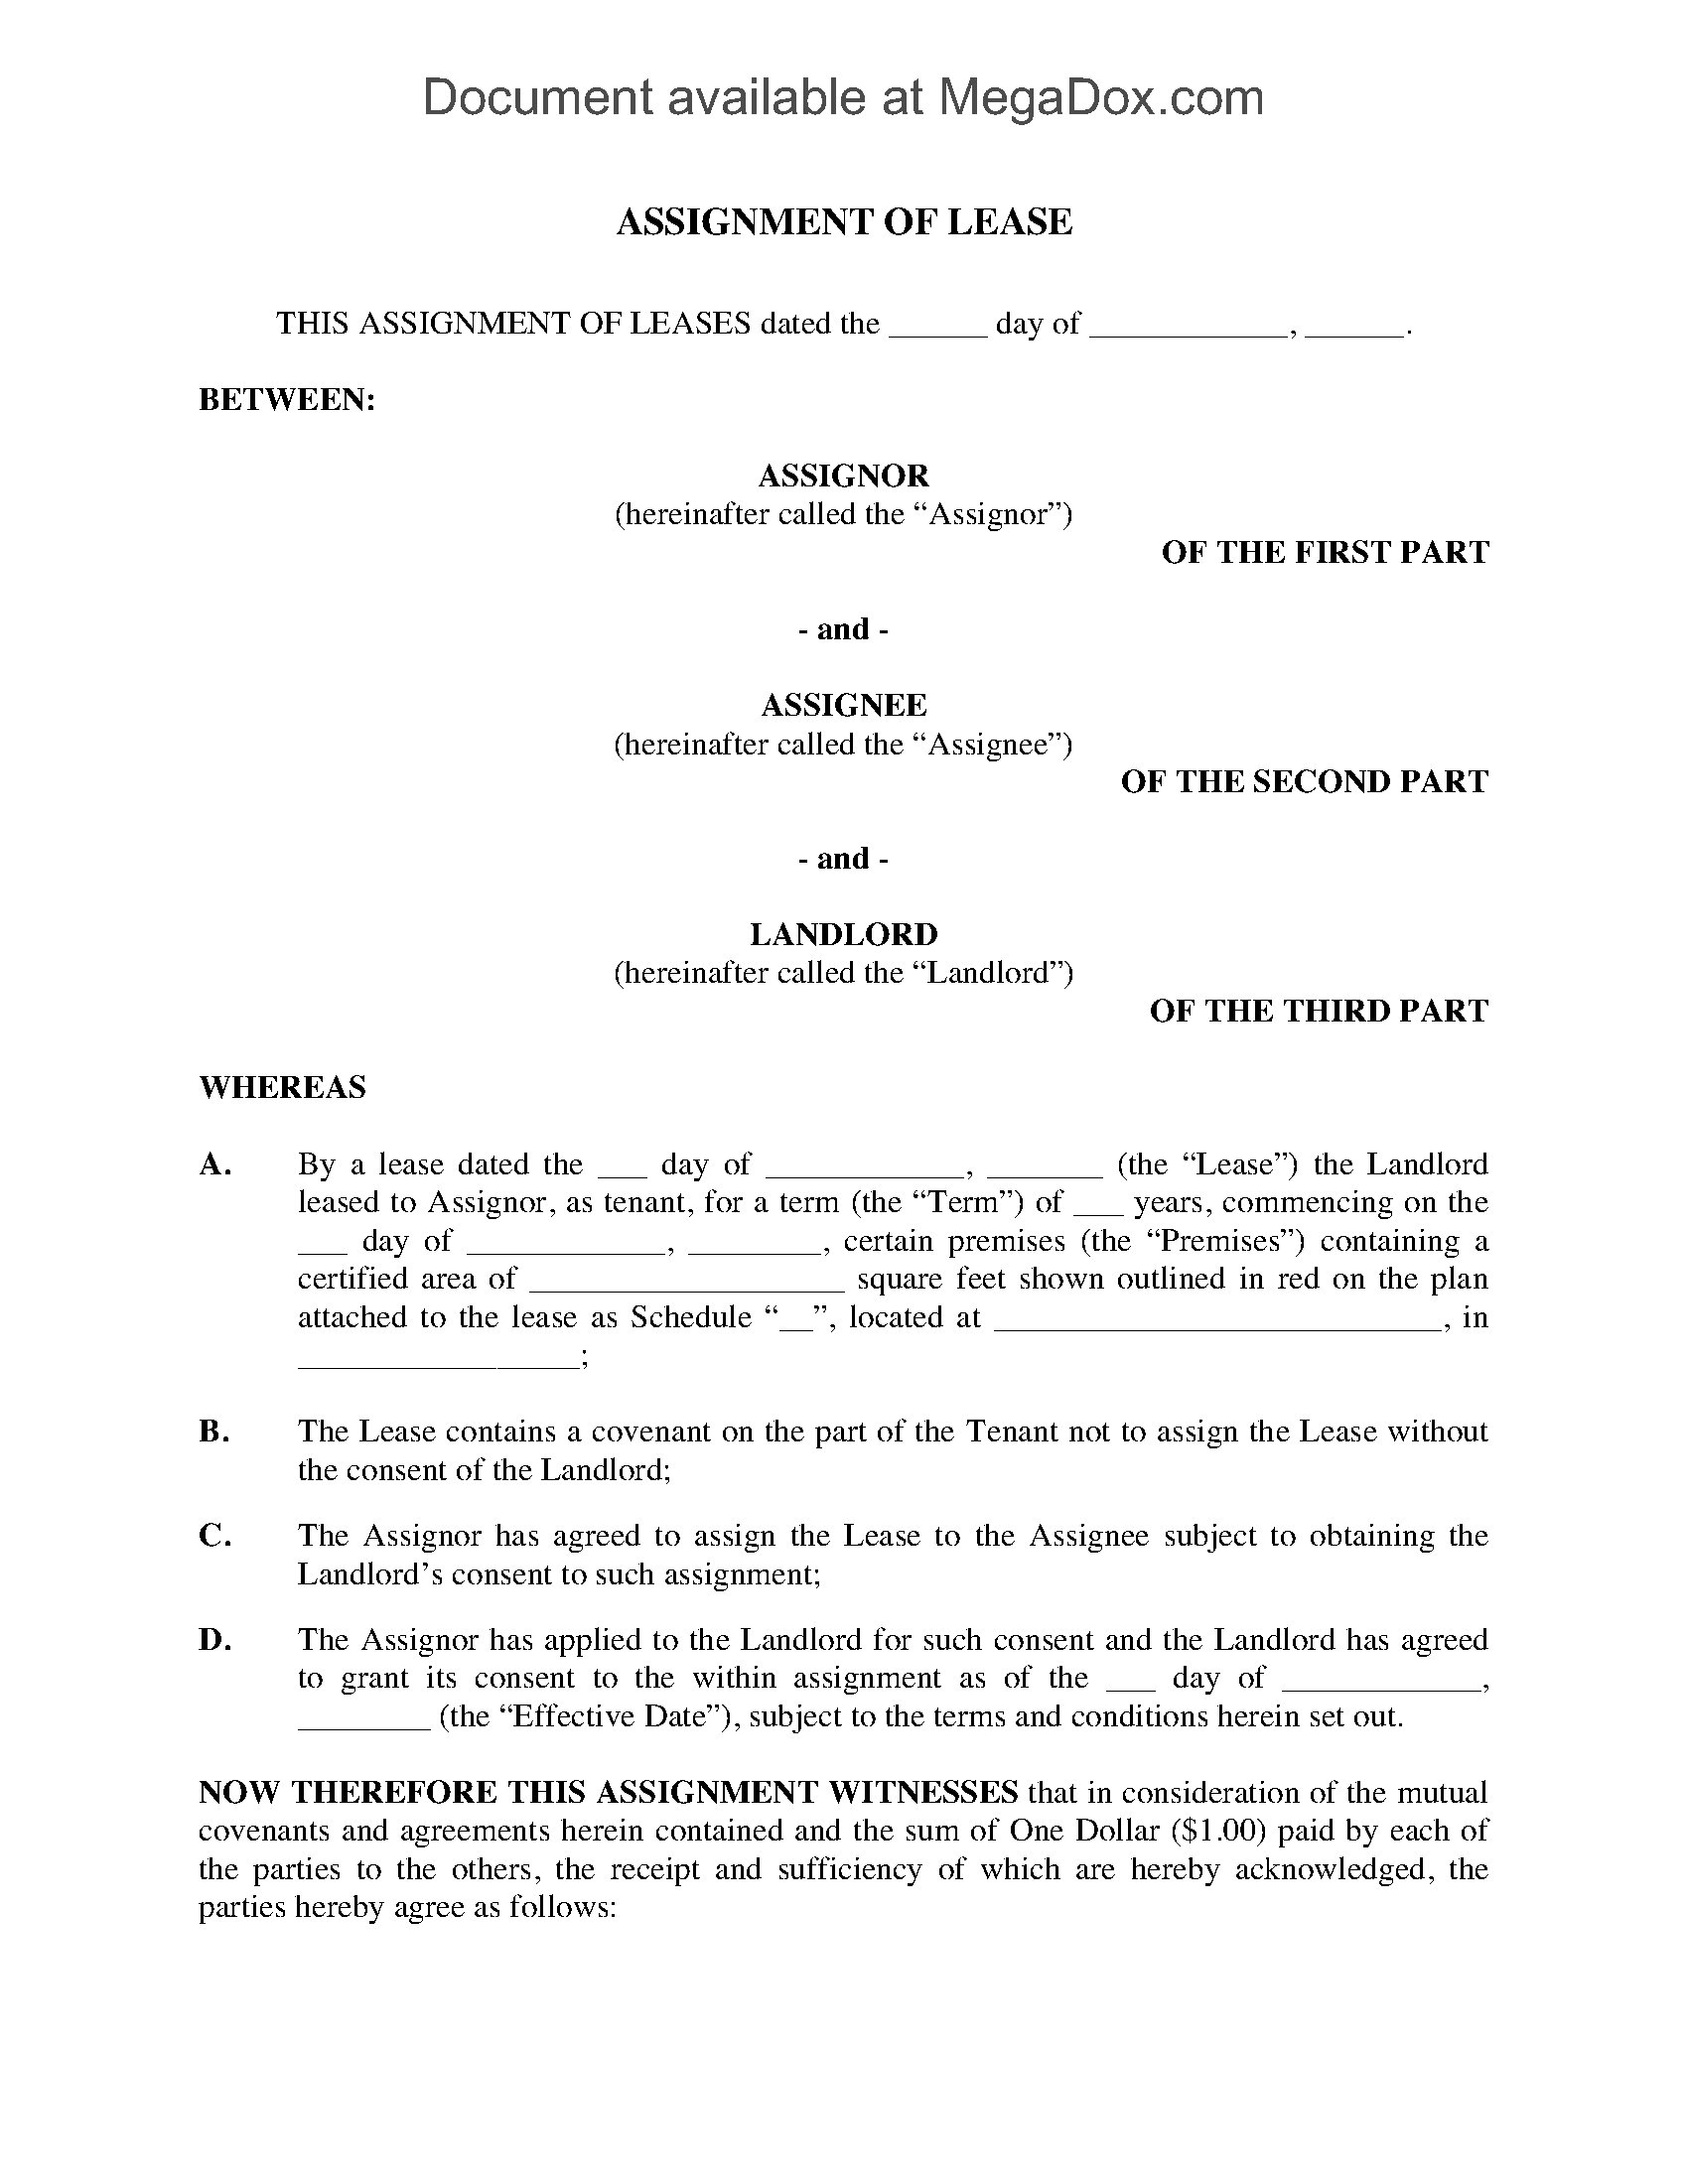 commercial lease assignment agreement